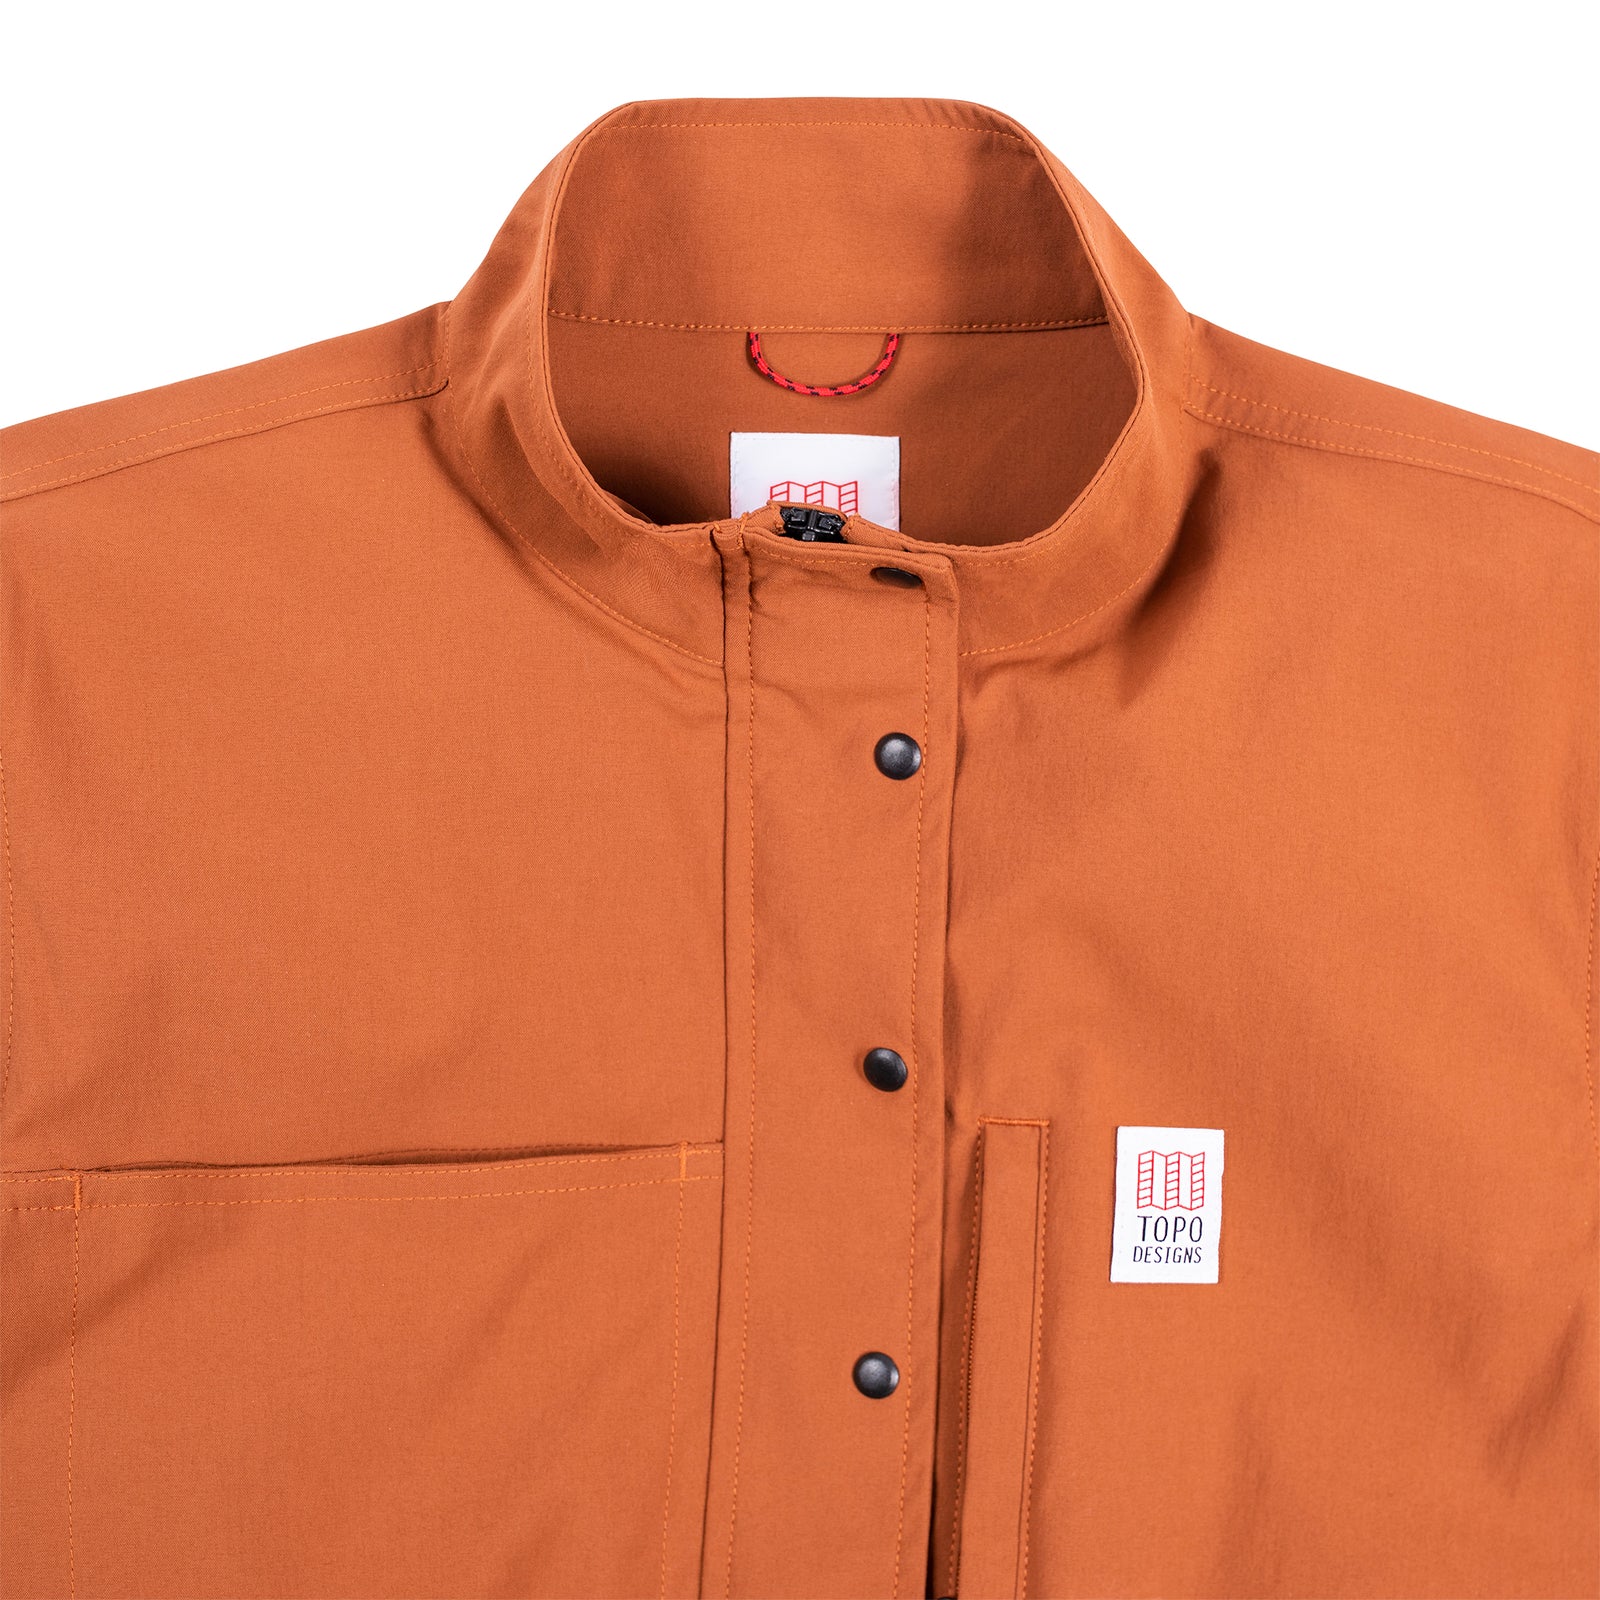 General detail shot of the Topo Designs Women's Coverall in Brick showing front snaps closed.